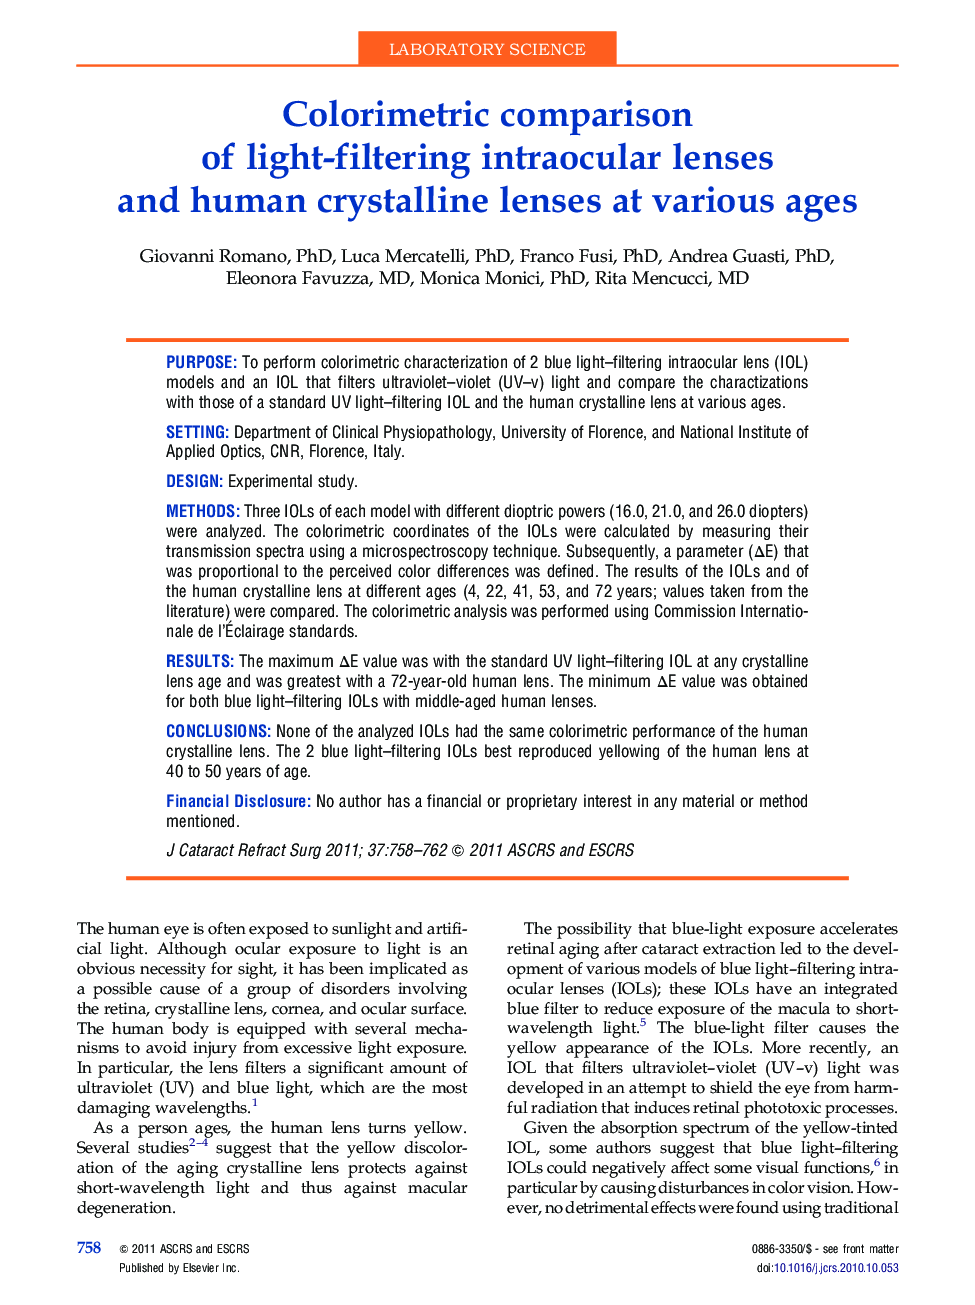 Colorimetric comparison of light-filtering intraocular lenses and human crystalline lenses at various ages